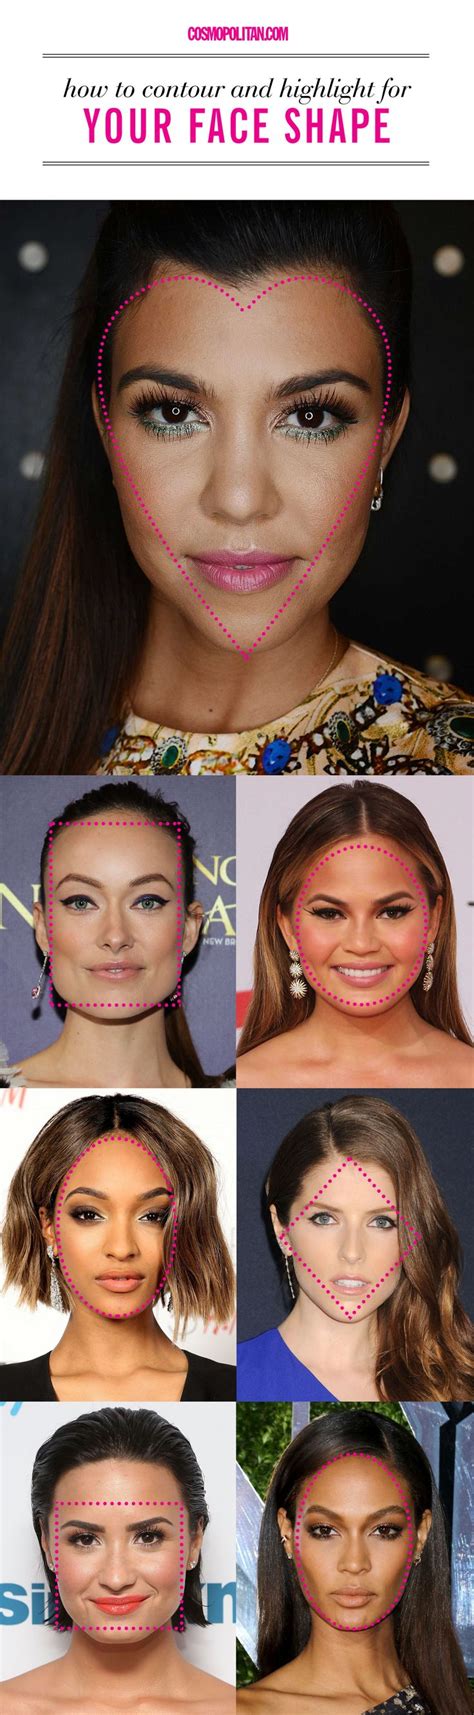 the right way to contour for your face shape face shape contour how to